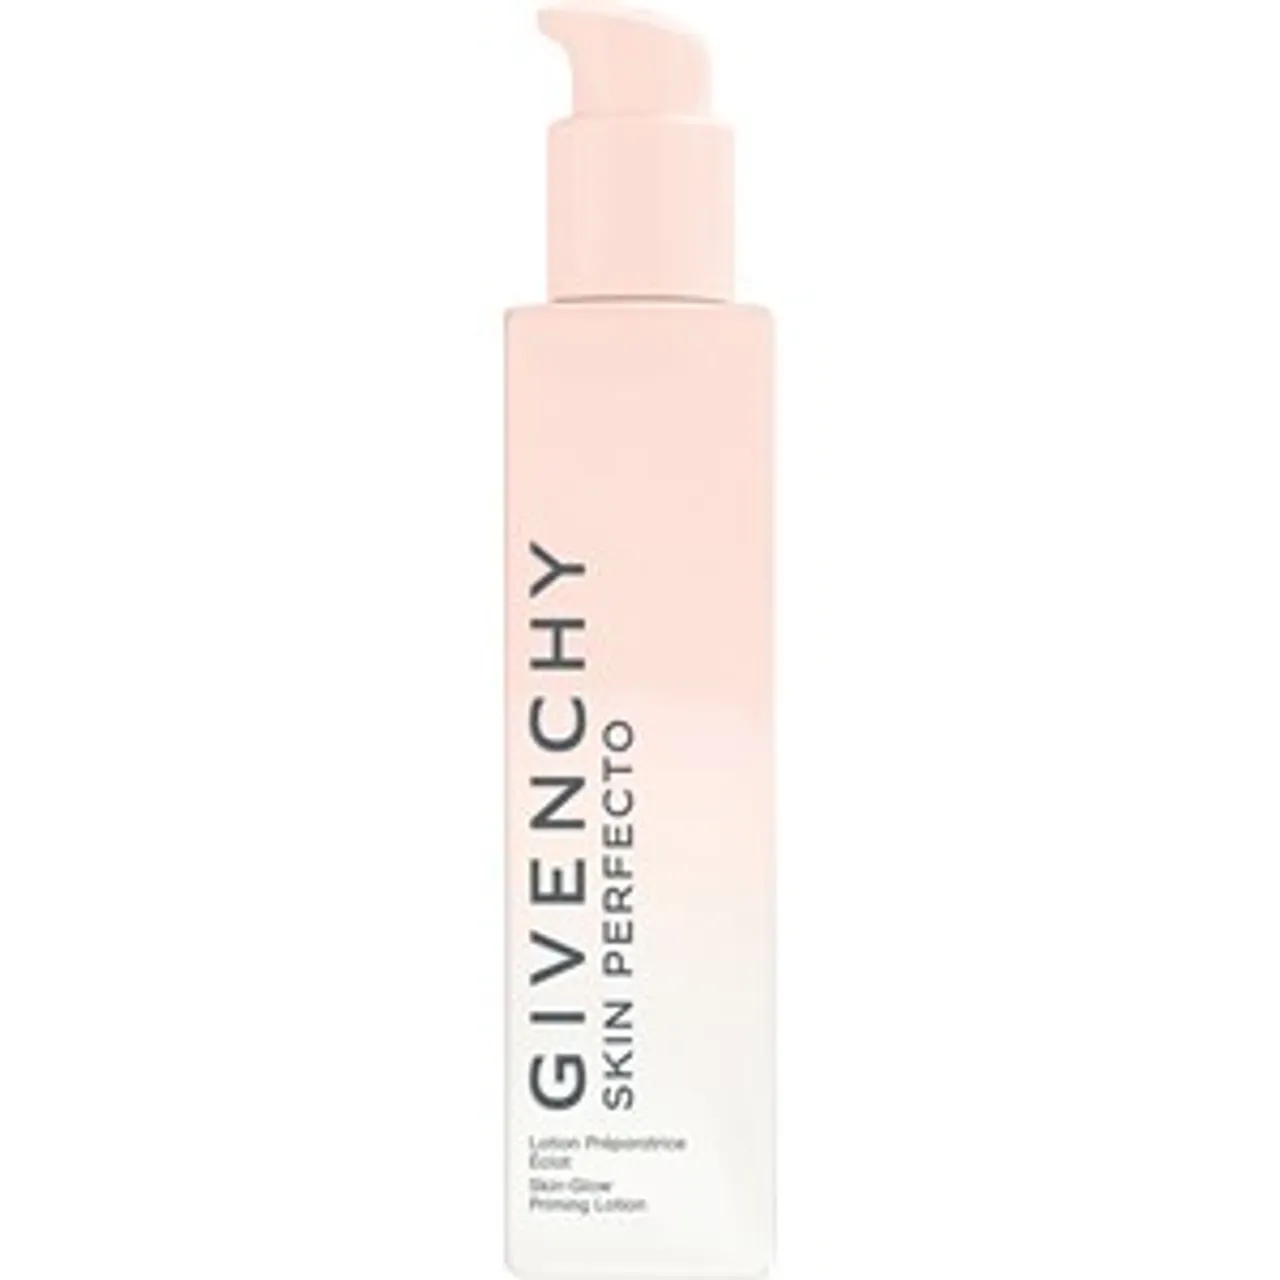 GIVENCHY Skin-Glow Priming Lotion 2 200 ml